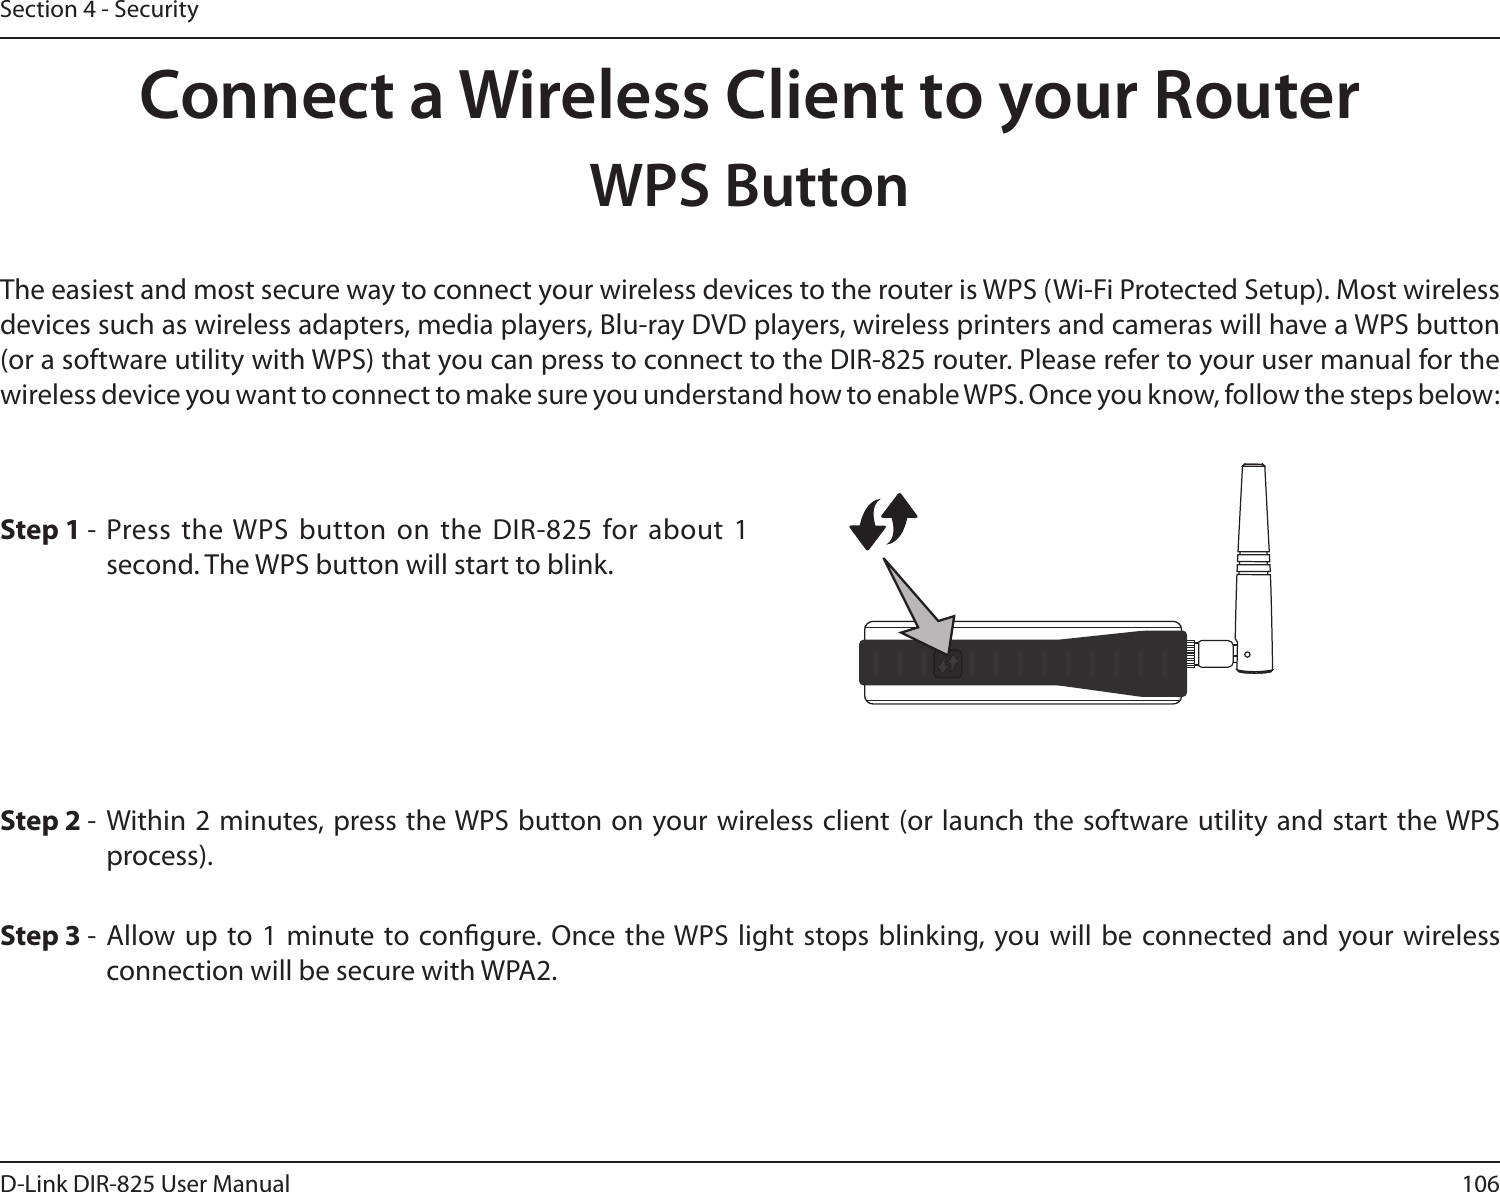 106D-Link DIR-825 User ManualSection 4 - SecurityConnect a Wireless Client to your RouterWPS ButtonStep 2 -  Within 2 minutes, press the WPS button on your wireless client (or launch the software utility and start the WPS process).The easiest and most secure way to connect your wireless devices to the router is WPS (Wi-Fi Protected Setup). Most wireless devices such as wireless adapters, media players, Blu-ray DVD players, wireless printers and cameras will have a WPS button (or a software utility with WPS) that you can press to connect to the DIR-825 router. Please refer to your user manual for the wireless device you want to connect to make sure you understand how to enable WPS. Once you know, follow the steps below:Step 1 - Press the WPS button on the  DIR-825 for about  1 second. The WPS button will start to blink.Step 3 - Allow up  to 1  minute to congure.  Once the WPS light stops blinking, you will be  connected and your wireless connection will be secure with WPA2.